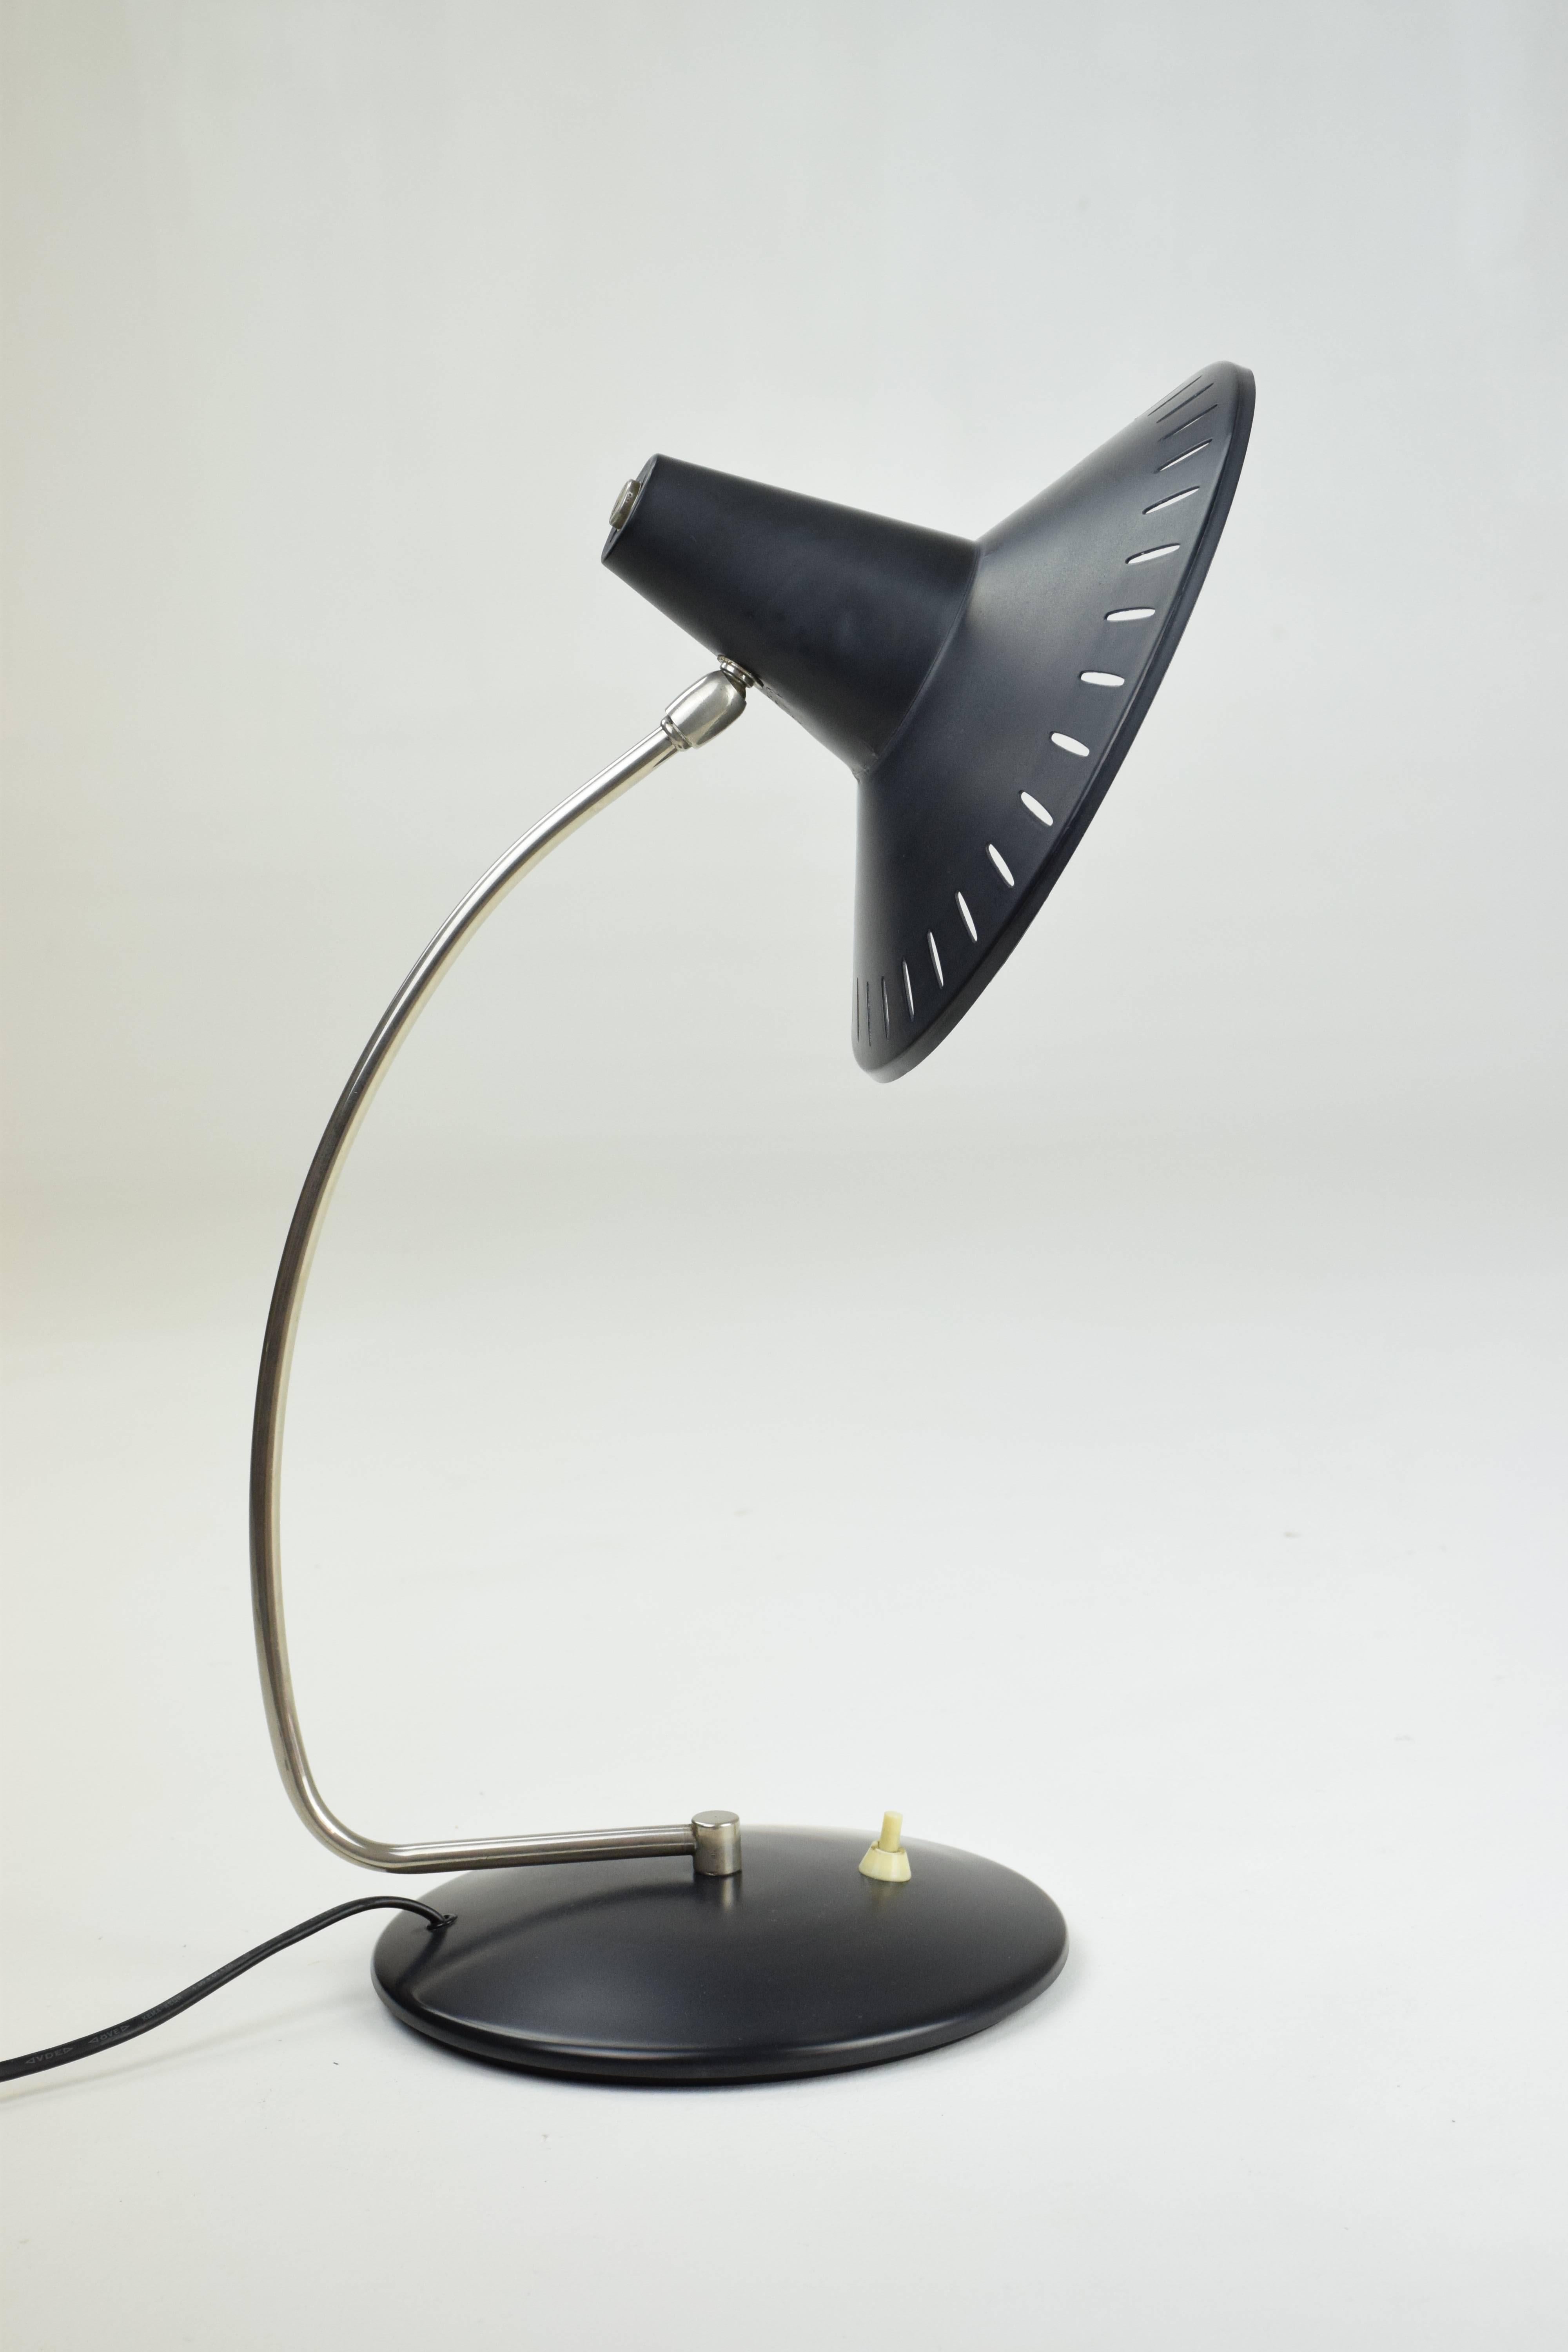 20th century vintage mid-century modern style desk lamp composed of a black lacquered steel structure, chrome arm and a perforated shade. With light switch at the base. 

Italy, circa 1950s.